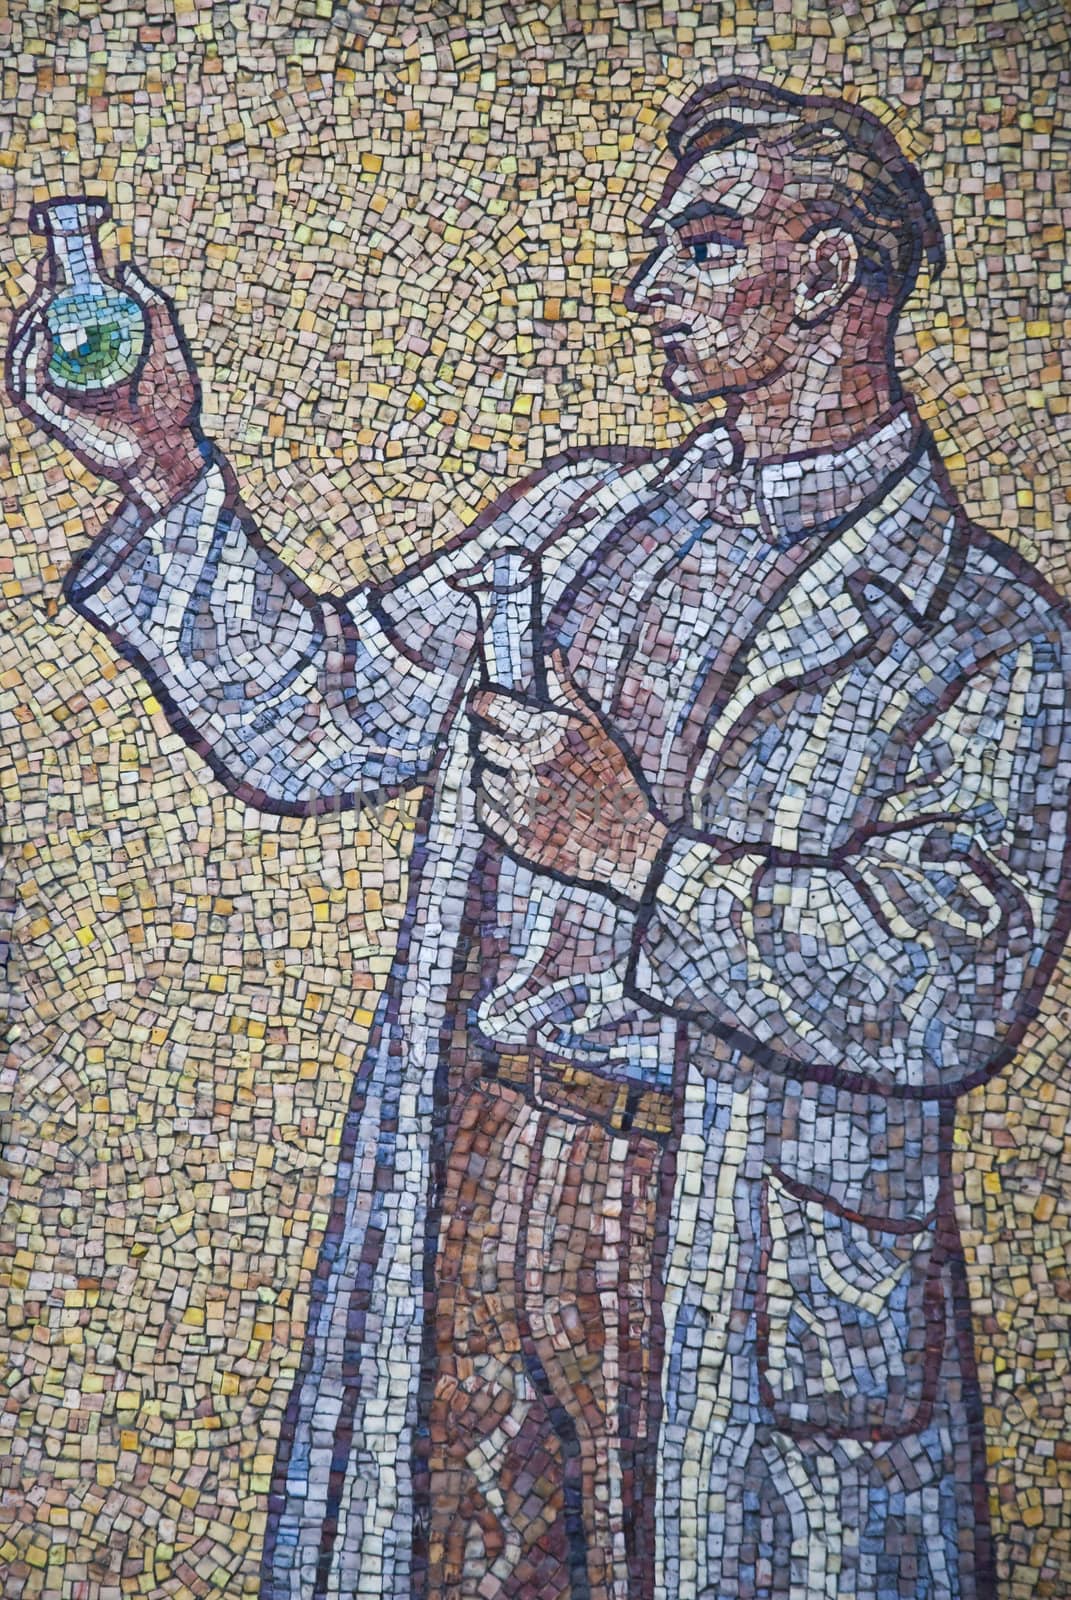 Mosaic with man in wall astronomical clock, Olomouc city - Czech by mozzyb